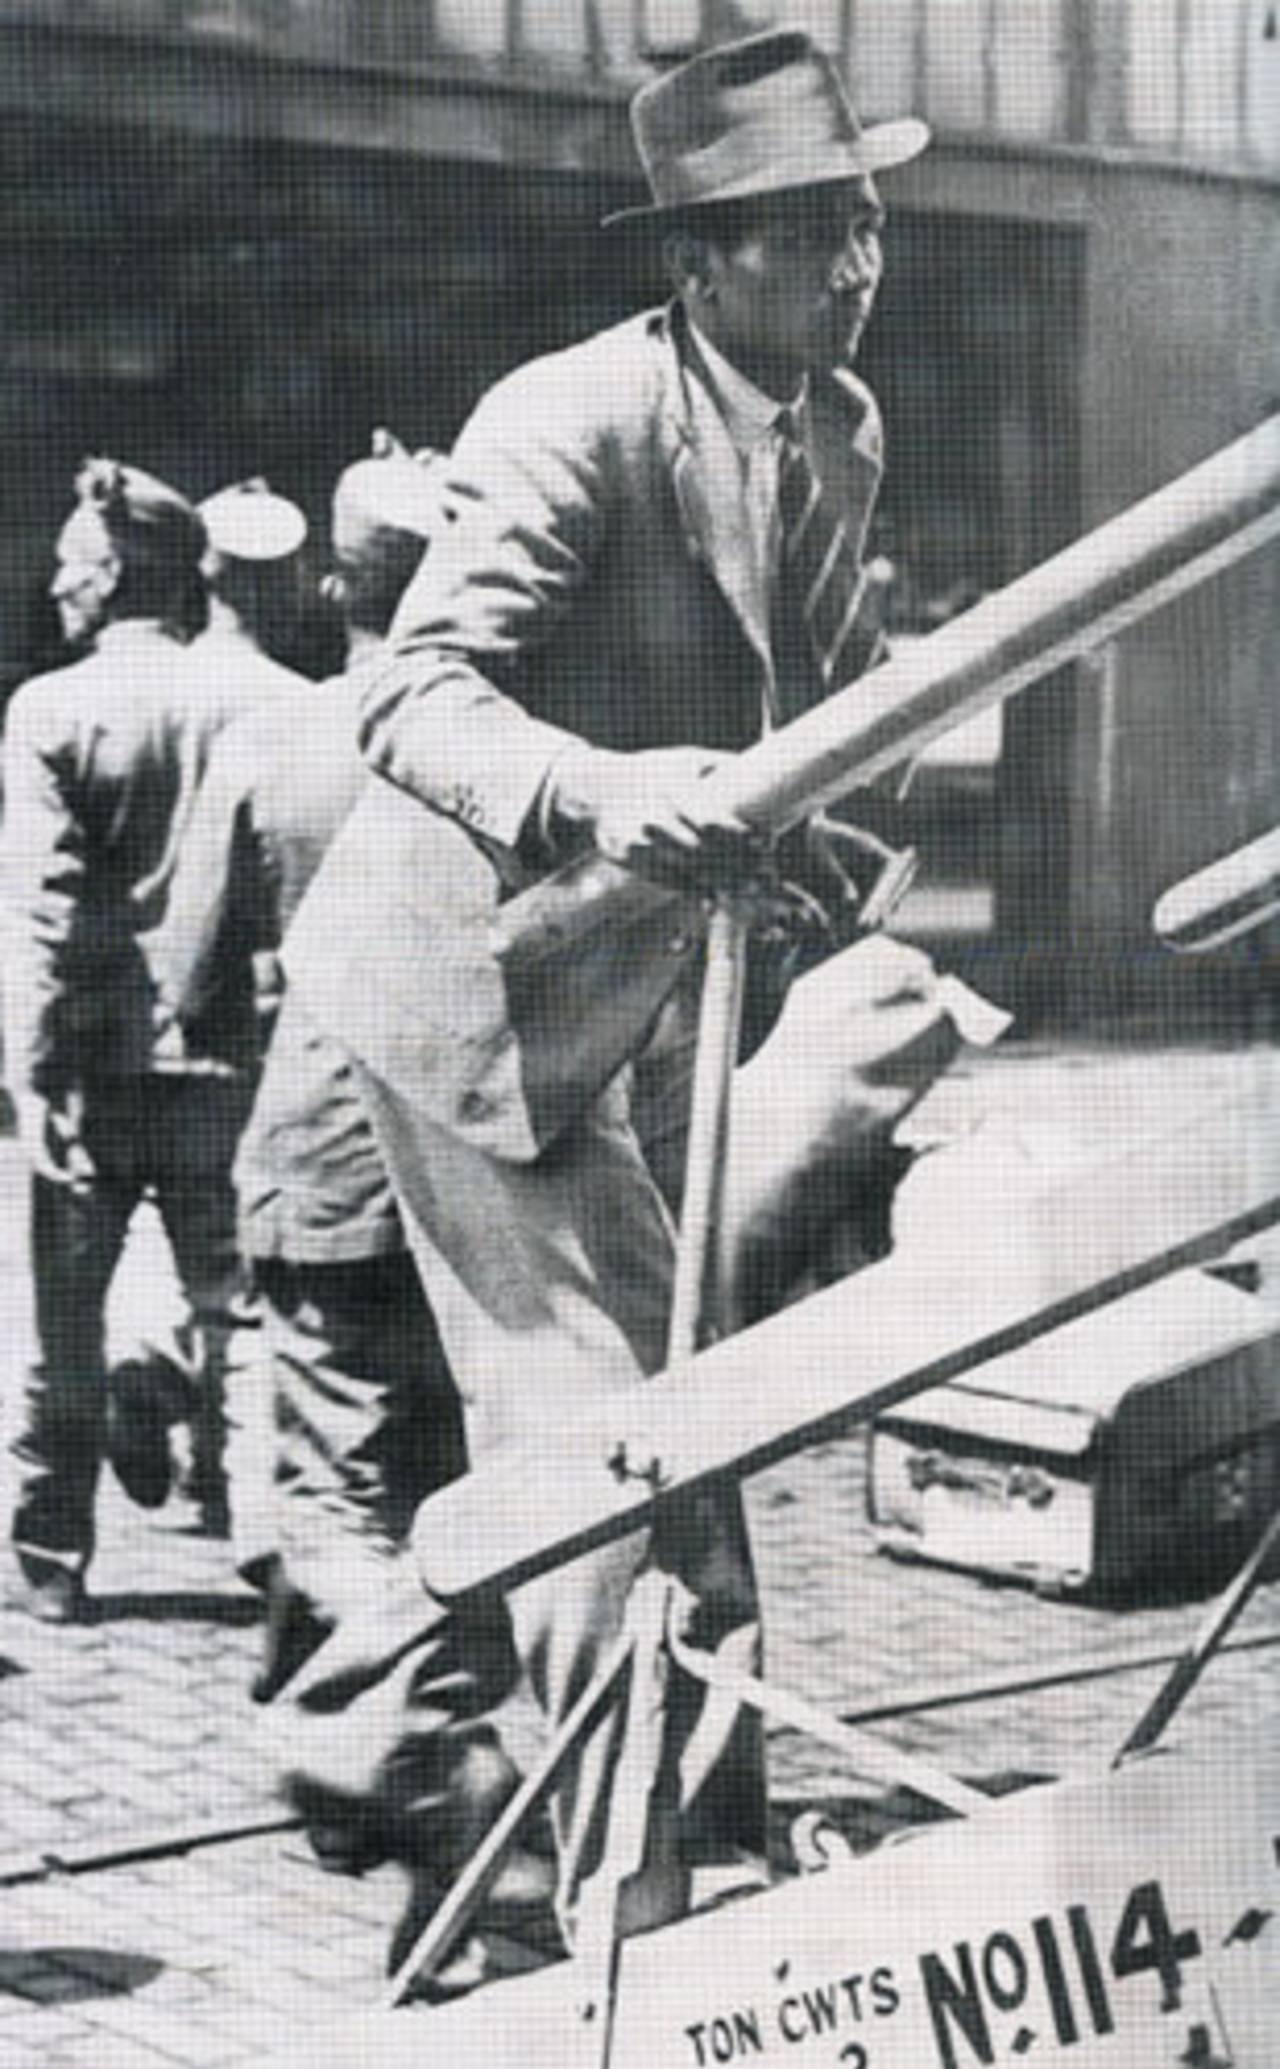 Lala Amarnath, seen here boarding a ship for India after being sent back from the 1936 England tour, has the longest gap between Tests for an Indian&nbsp;&nbsp;&bull;&nbsp;&nbsp;Wisden